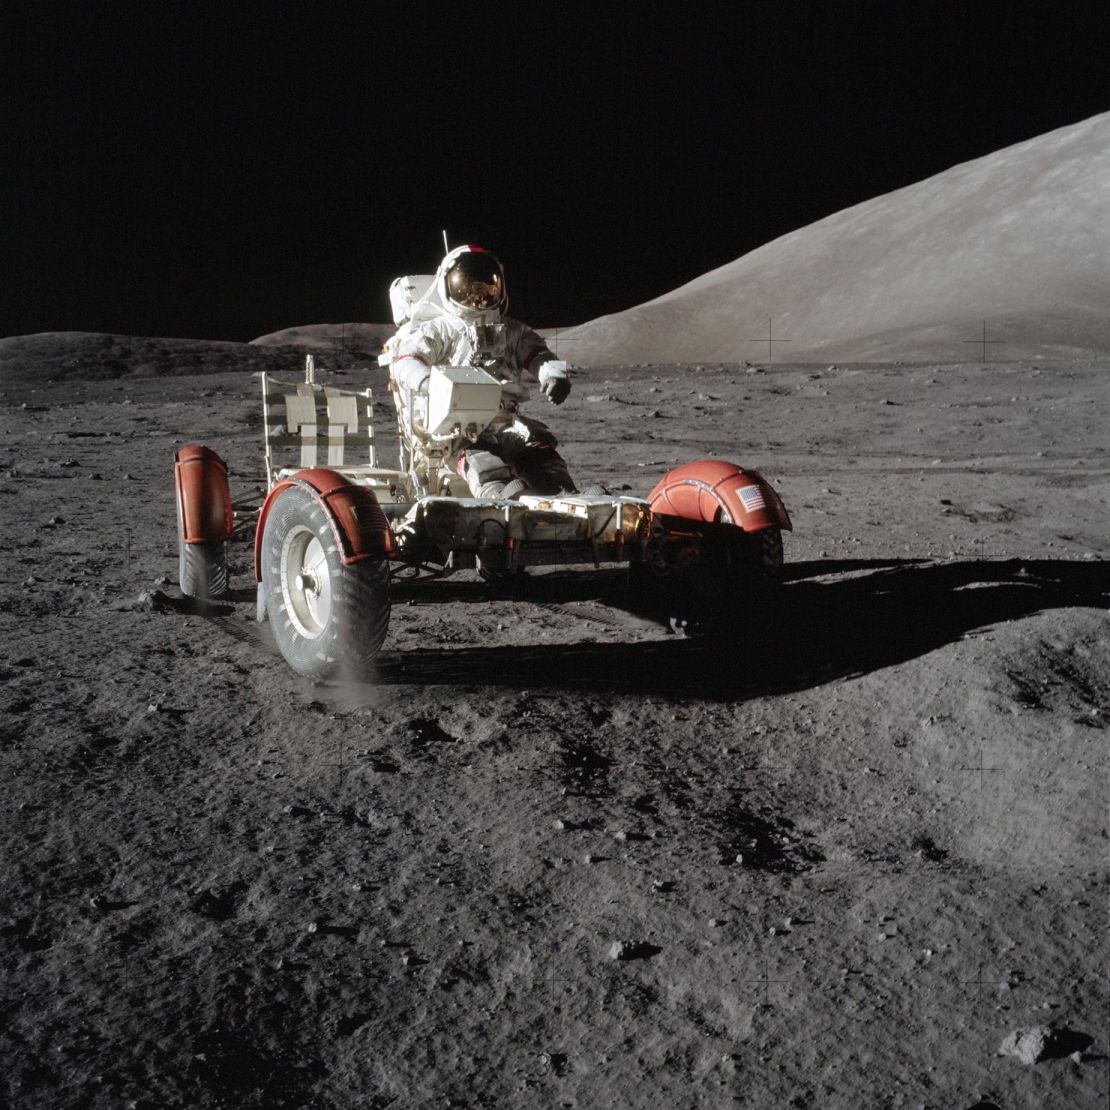 Astronaut Eugene A. Cernan drove a lunar roving vehicle on the moon's surface during the Apollo 17 mission in 1972. It's still on the moon more than 50 years later.